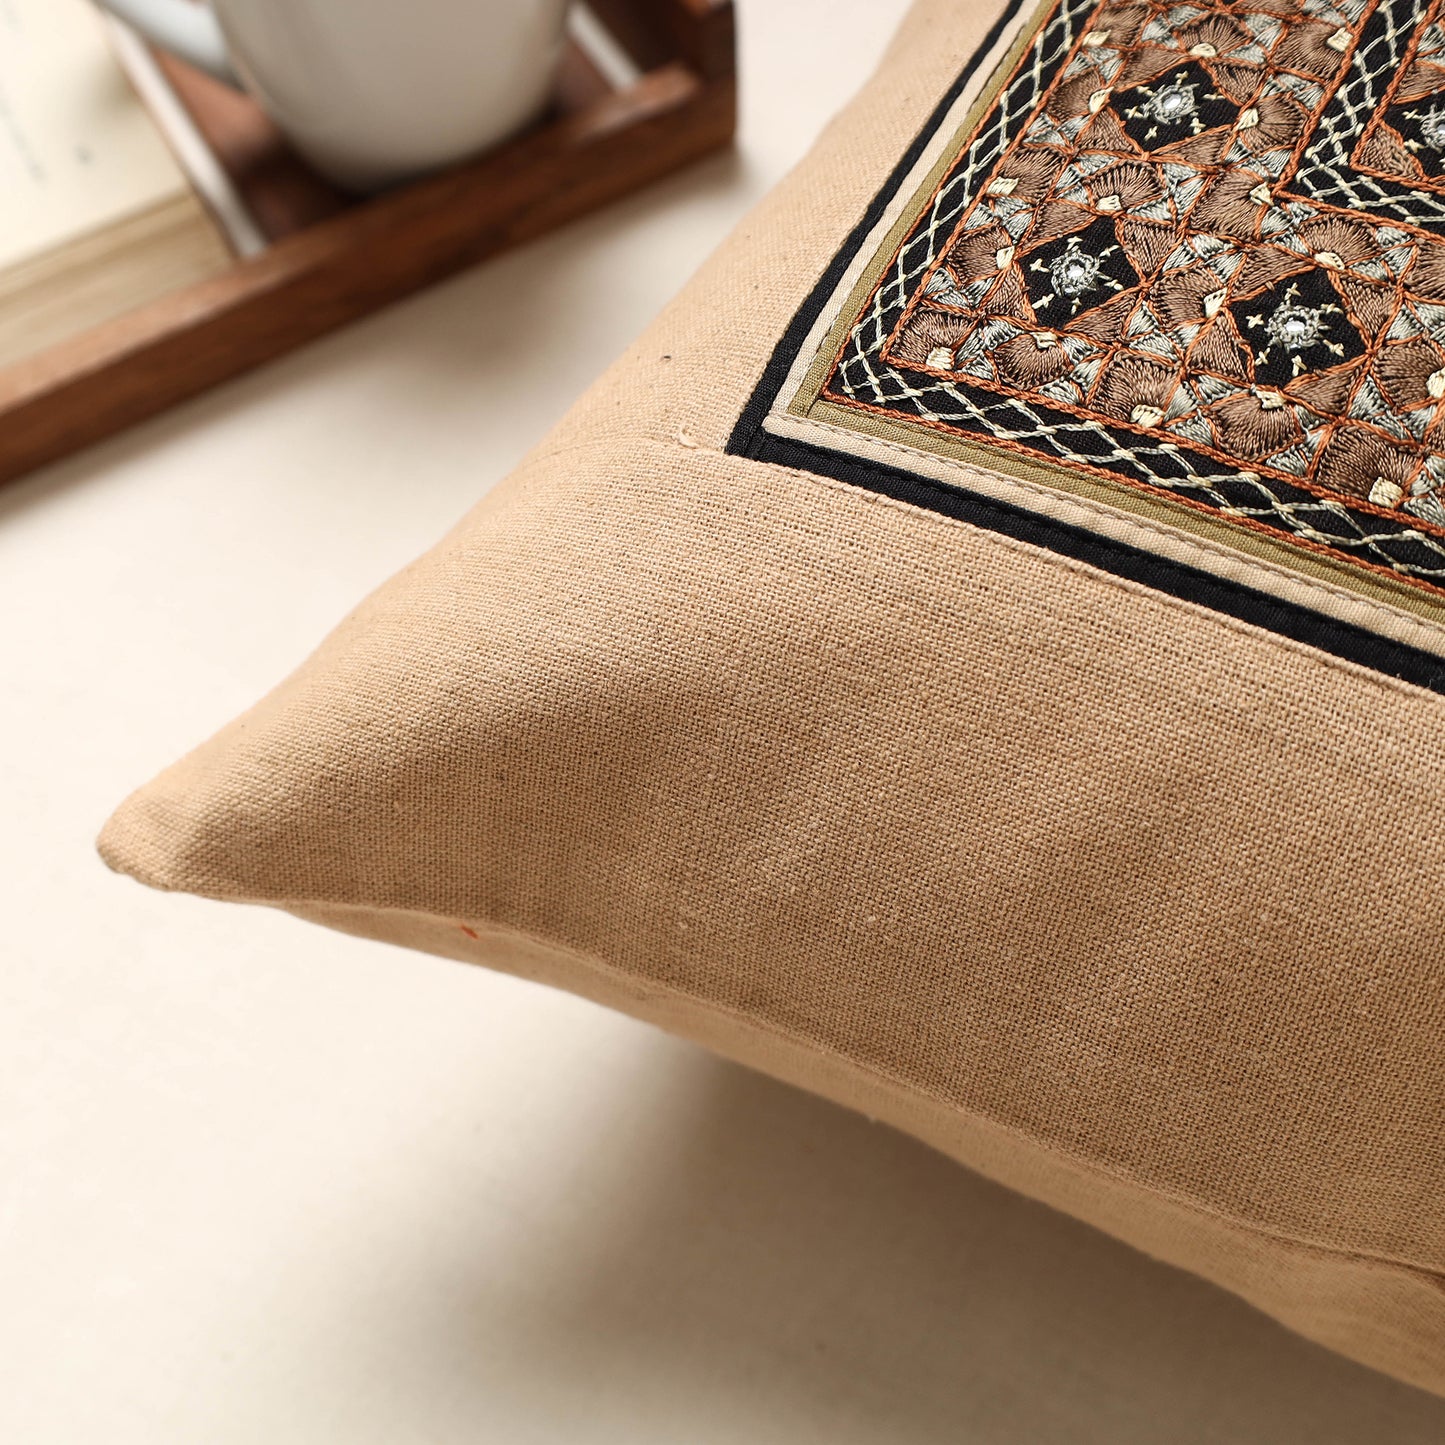 Beige - Kutch Neran Hand Embroidery Cotton Cushion Cover (16 x 16 in)